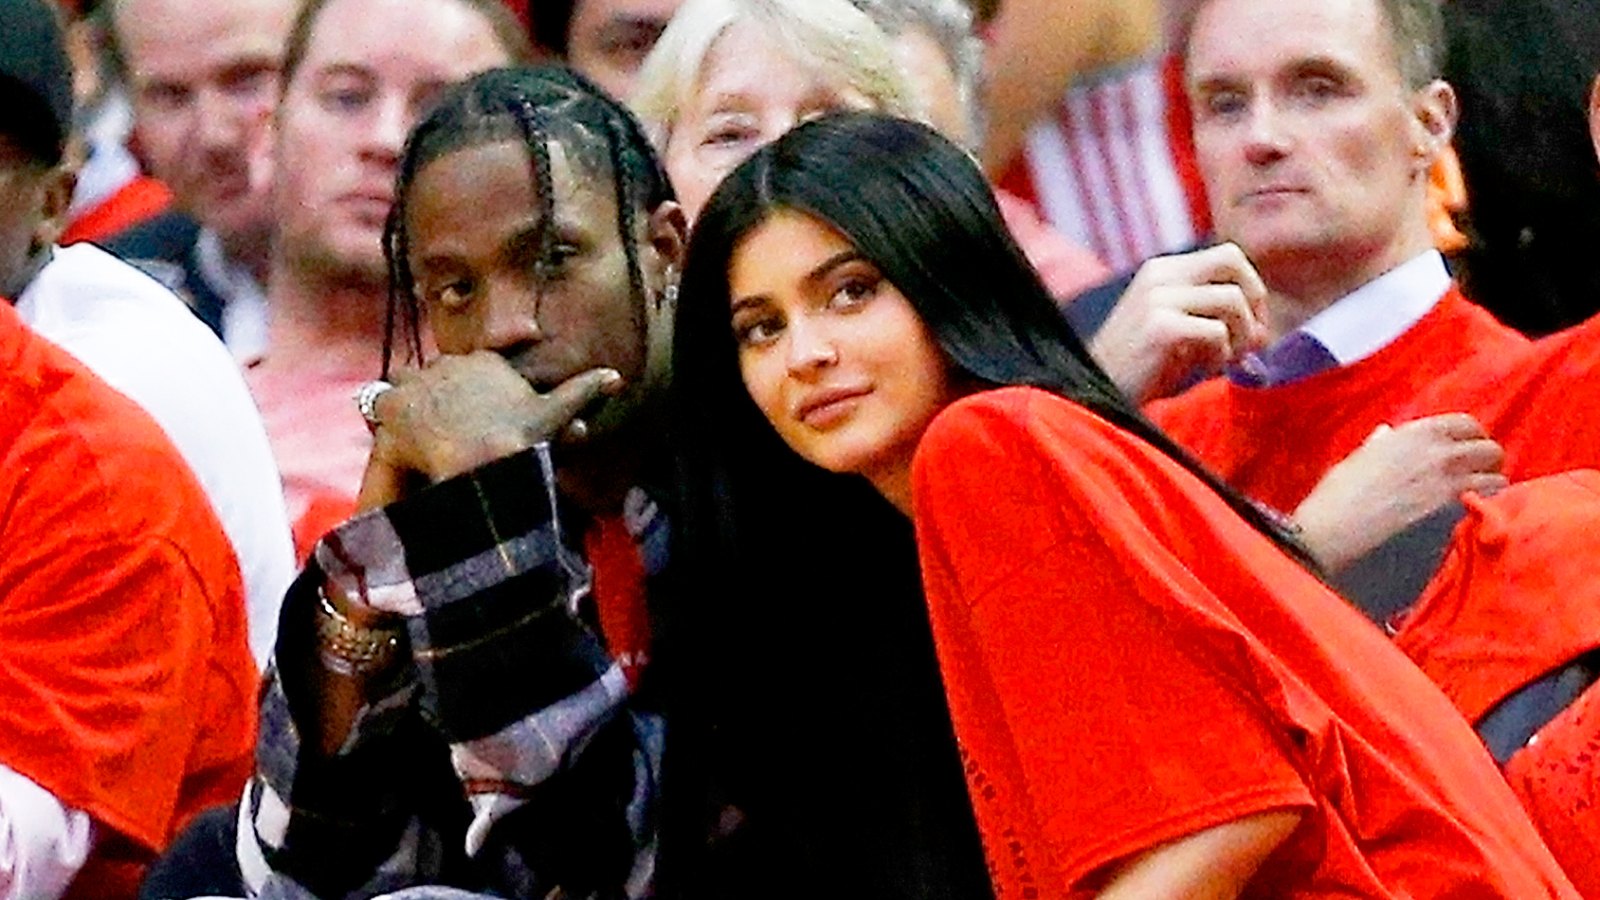 Travis Scott and Kylie Jenner watch court side during Game Five of the Western Conference Quarterfinals game of the 2017 NBA Playoffs at Toyota Center on April 25, 2017 in Houston, Texas.